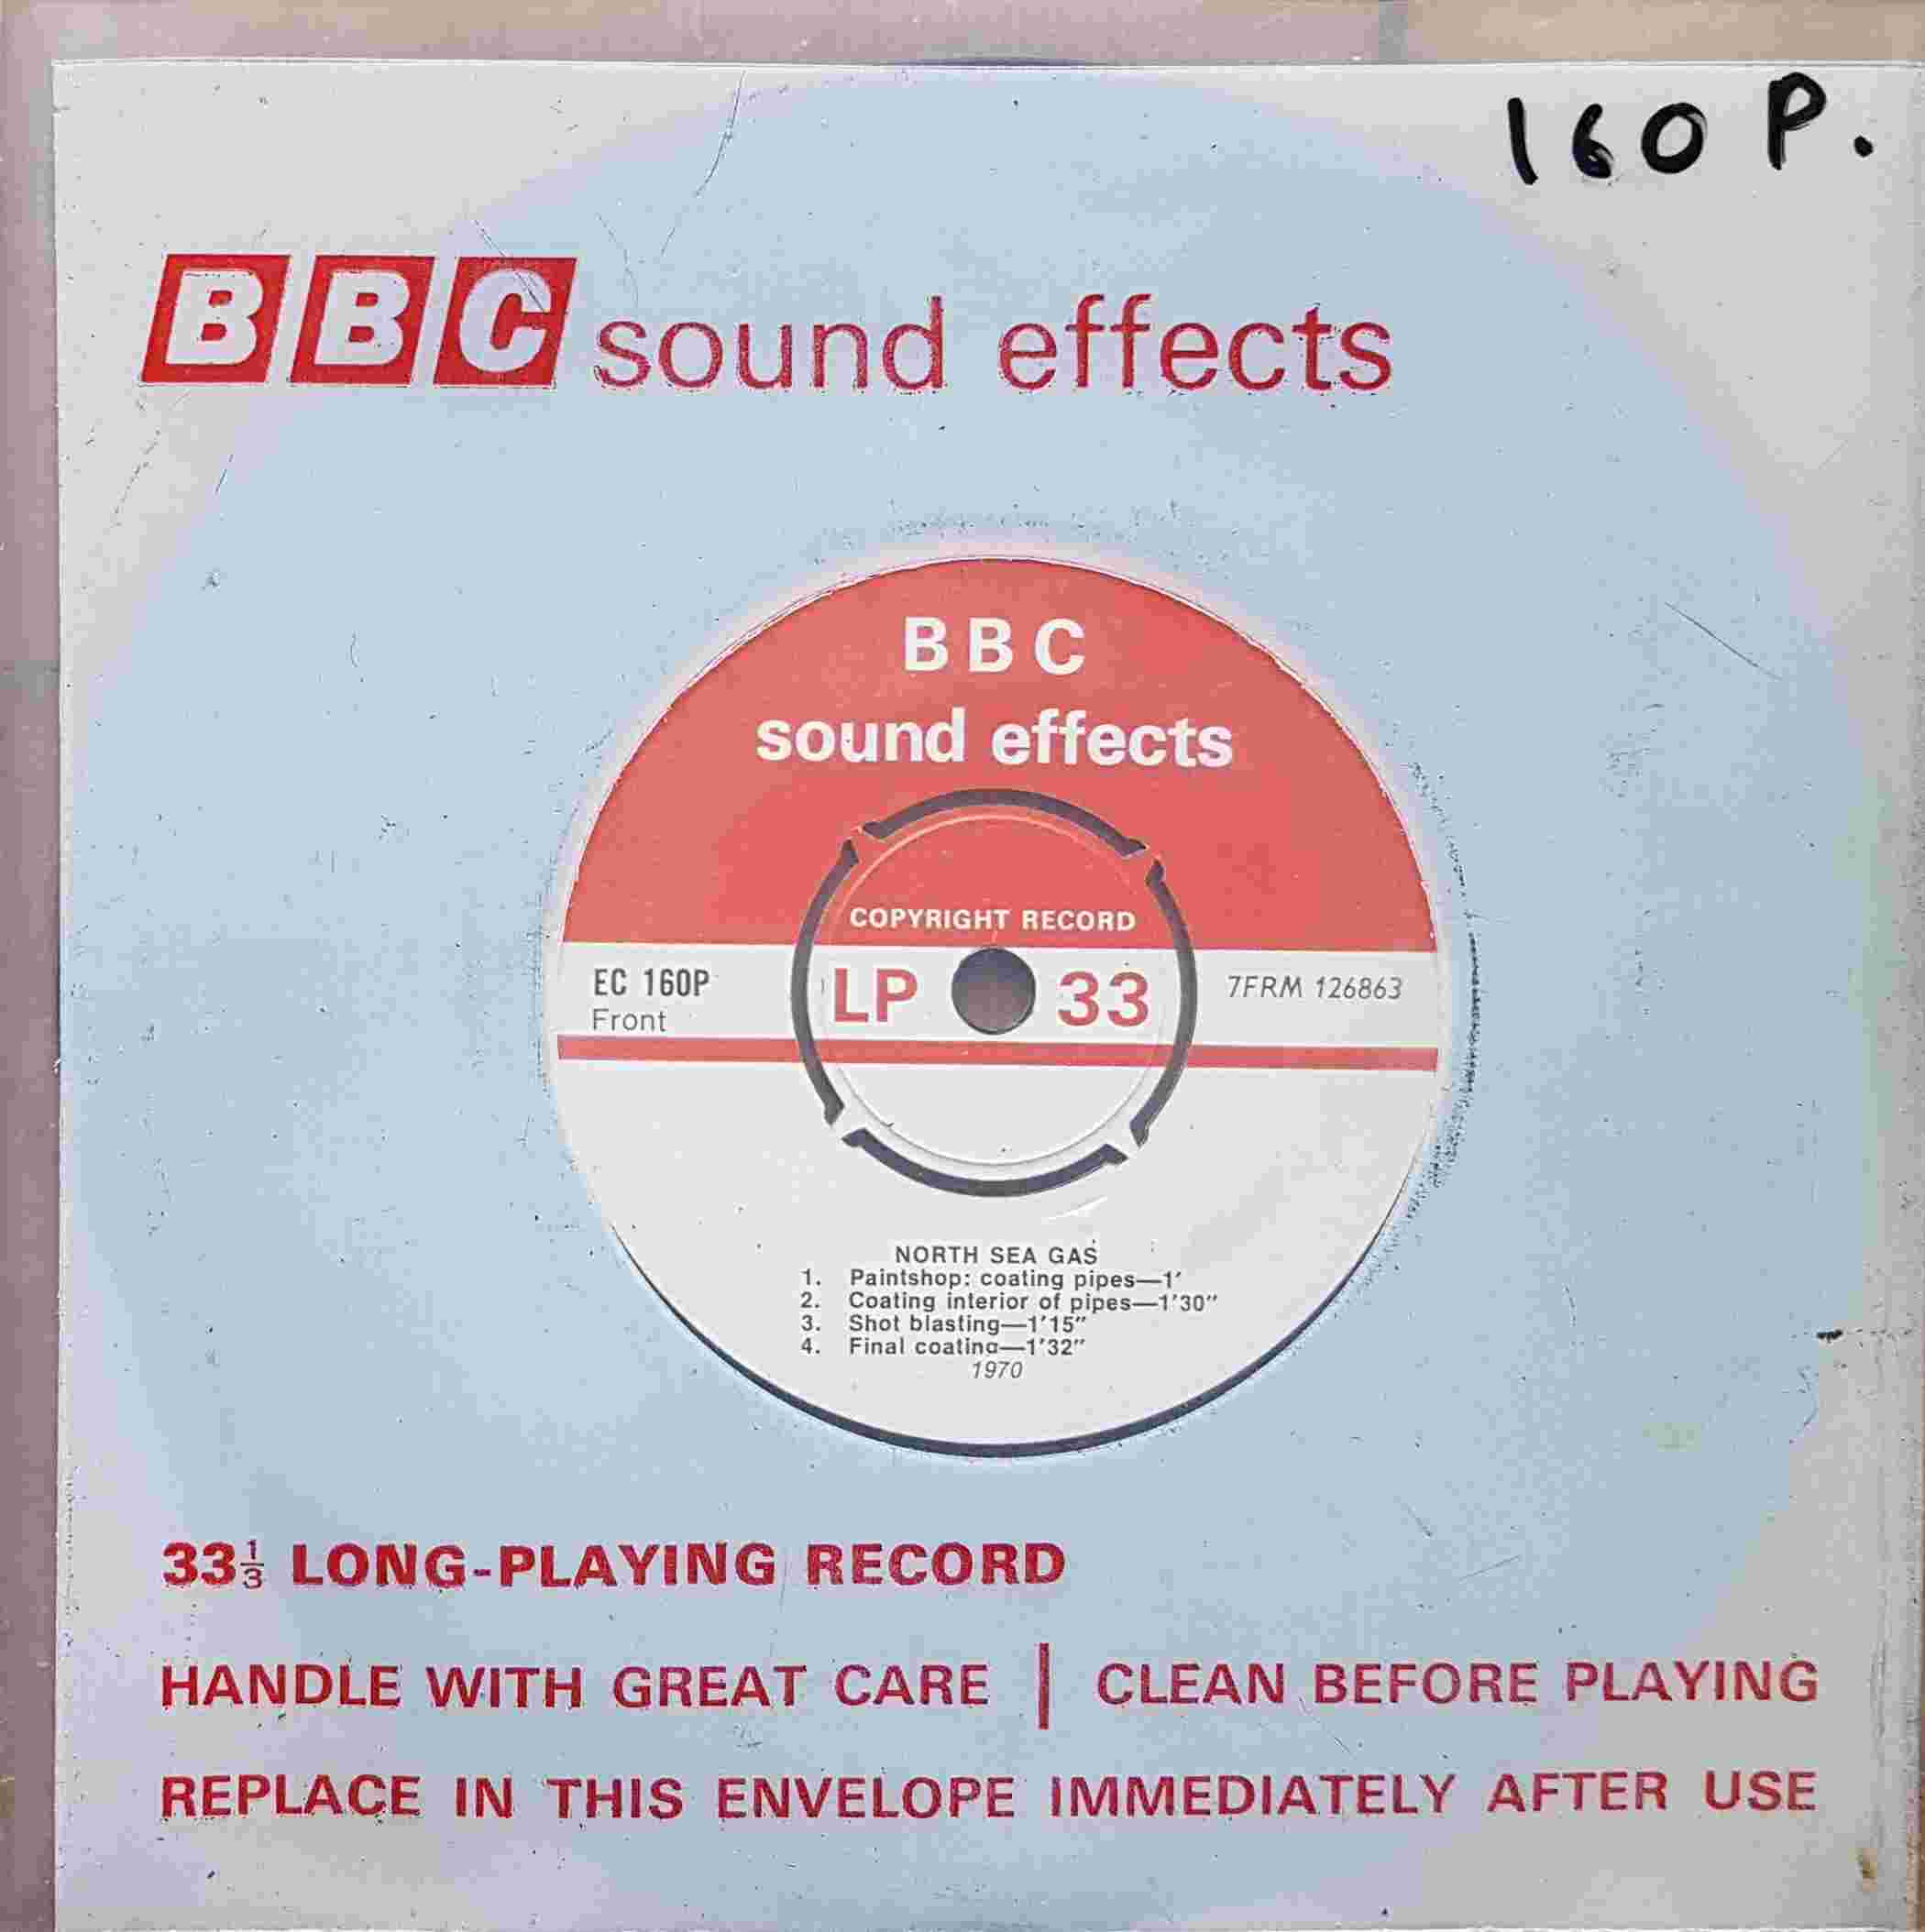 Picture of EC 160P North Sea gas by artist Not registered from the BBC singles - Records and Tapes library